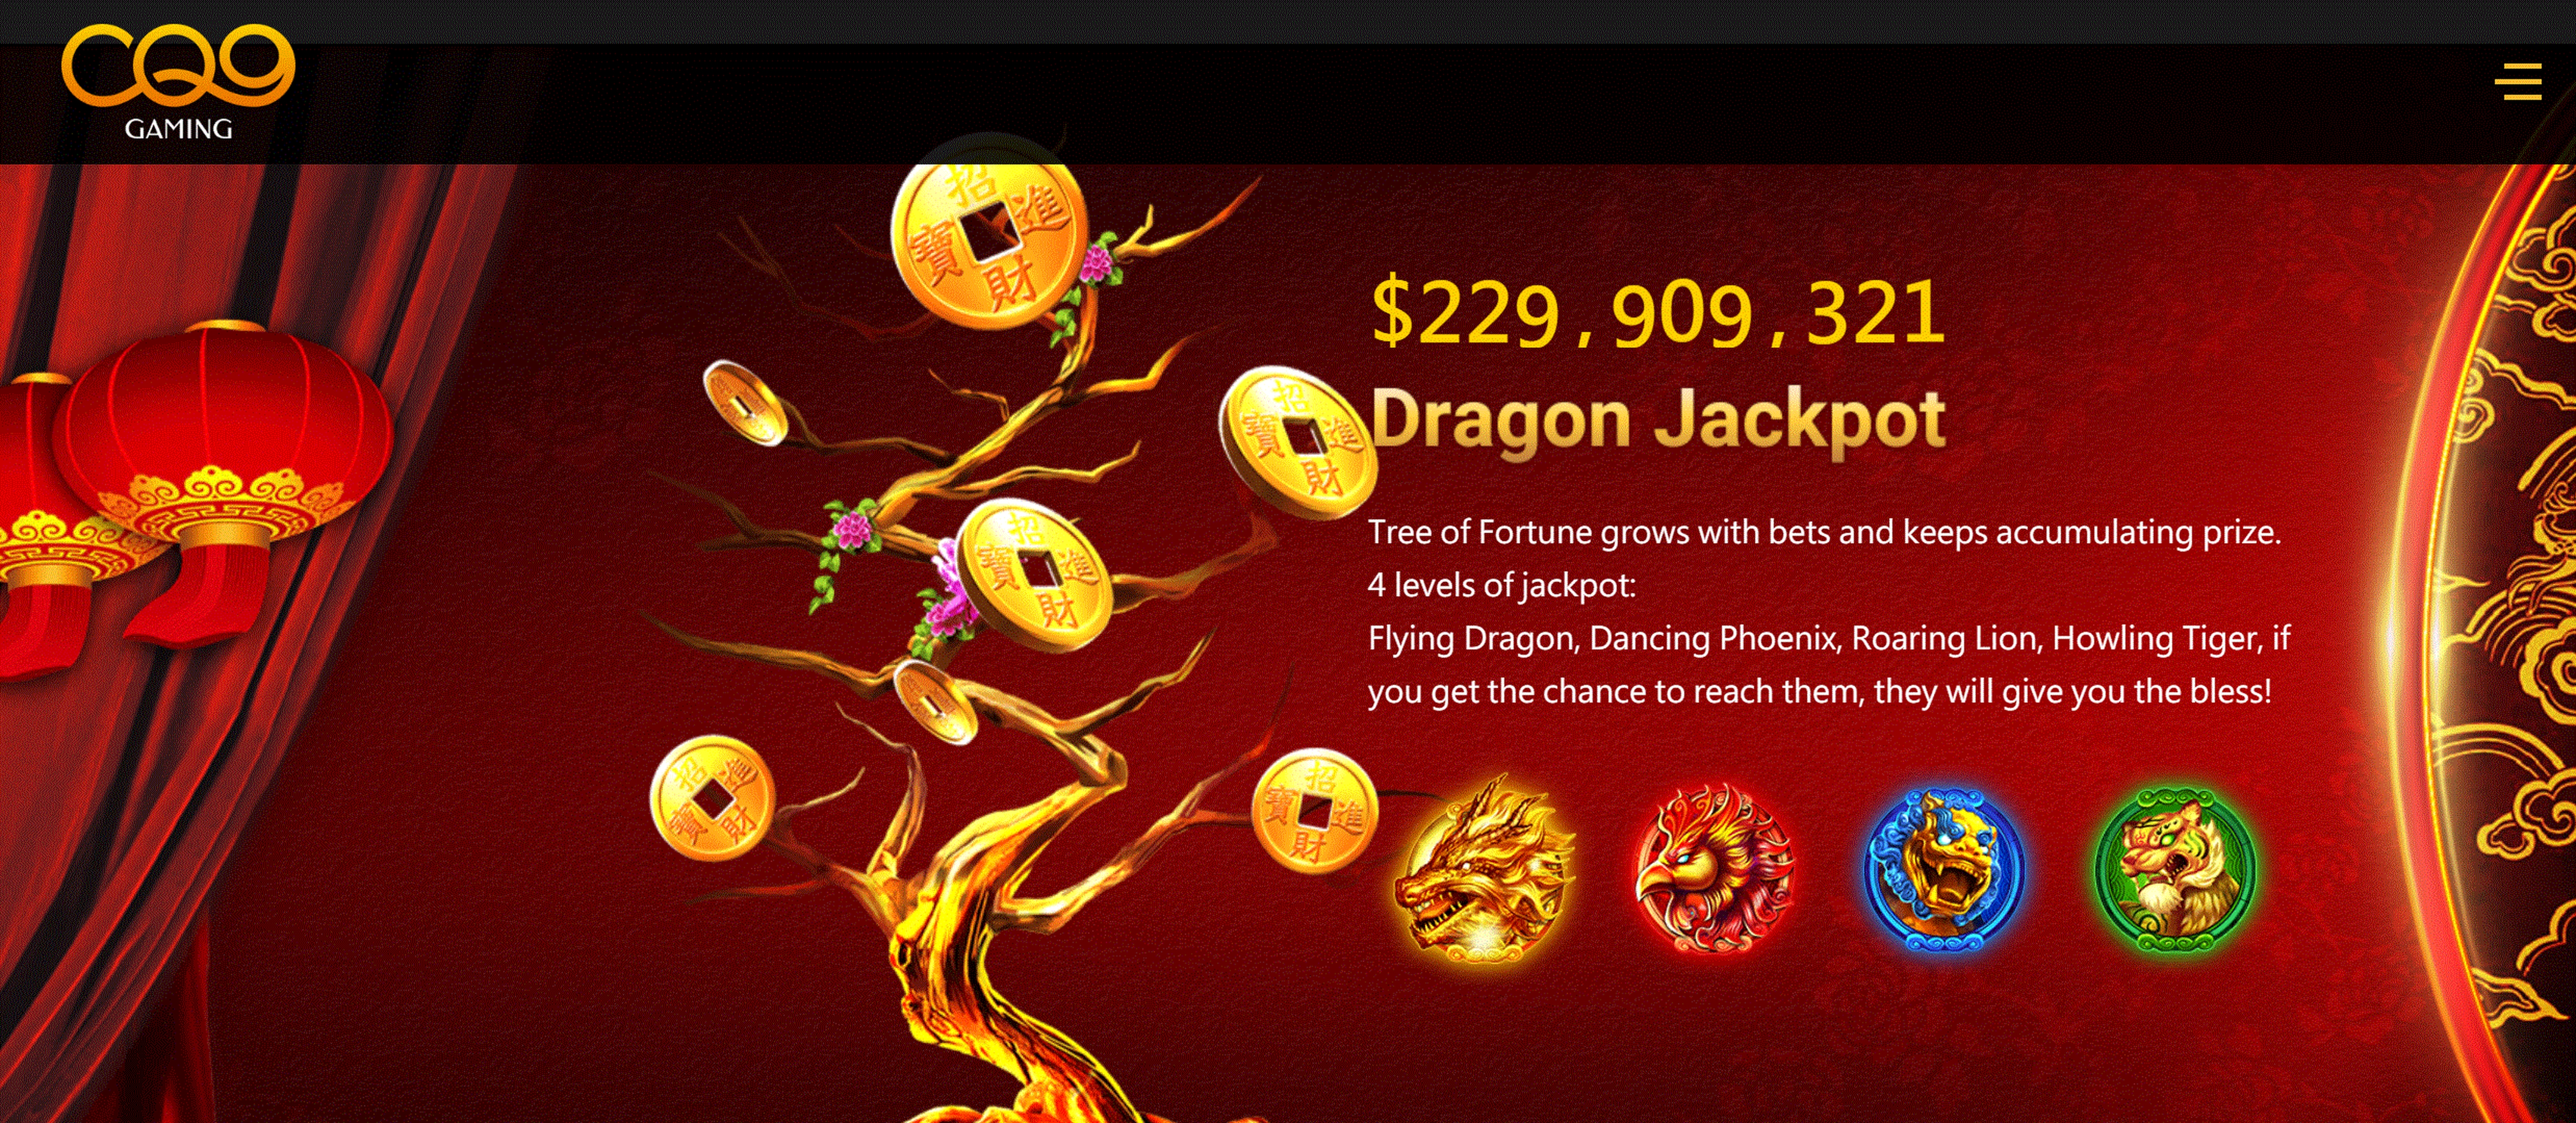 The Great Lion Online Slot Demo Game by CQ9Gaming